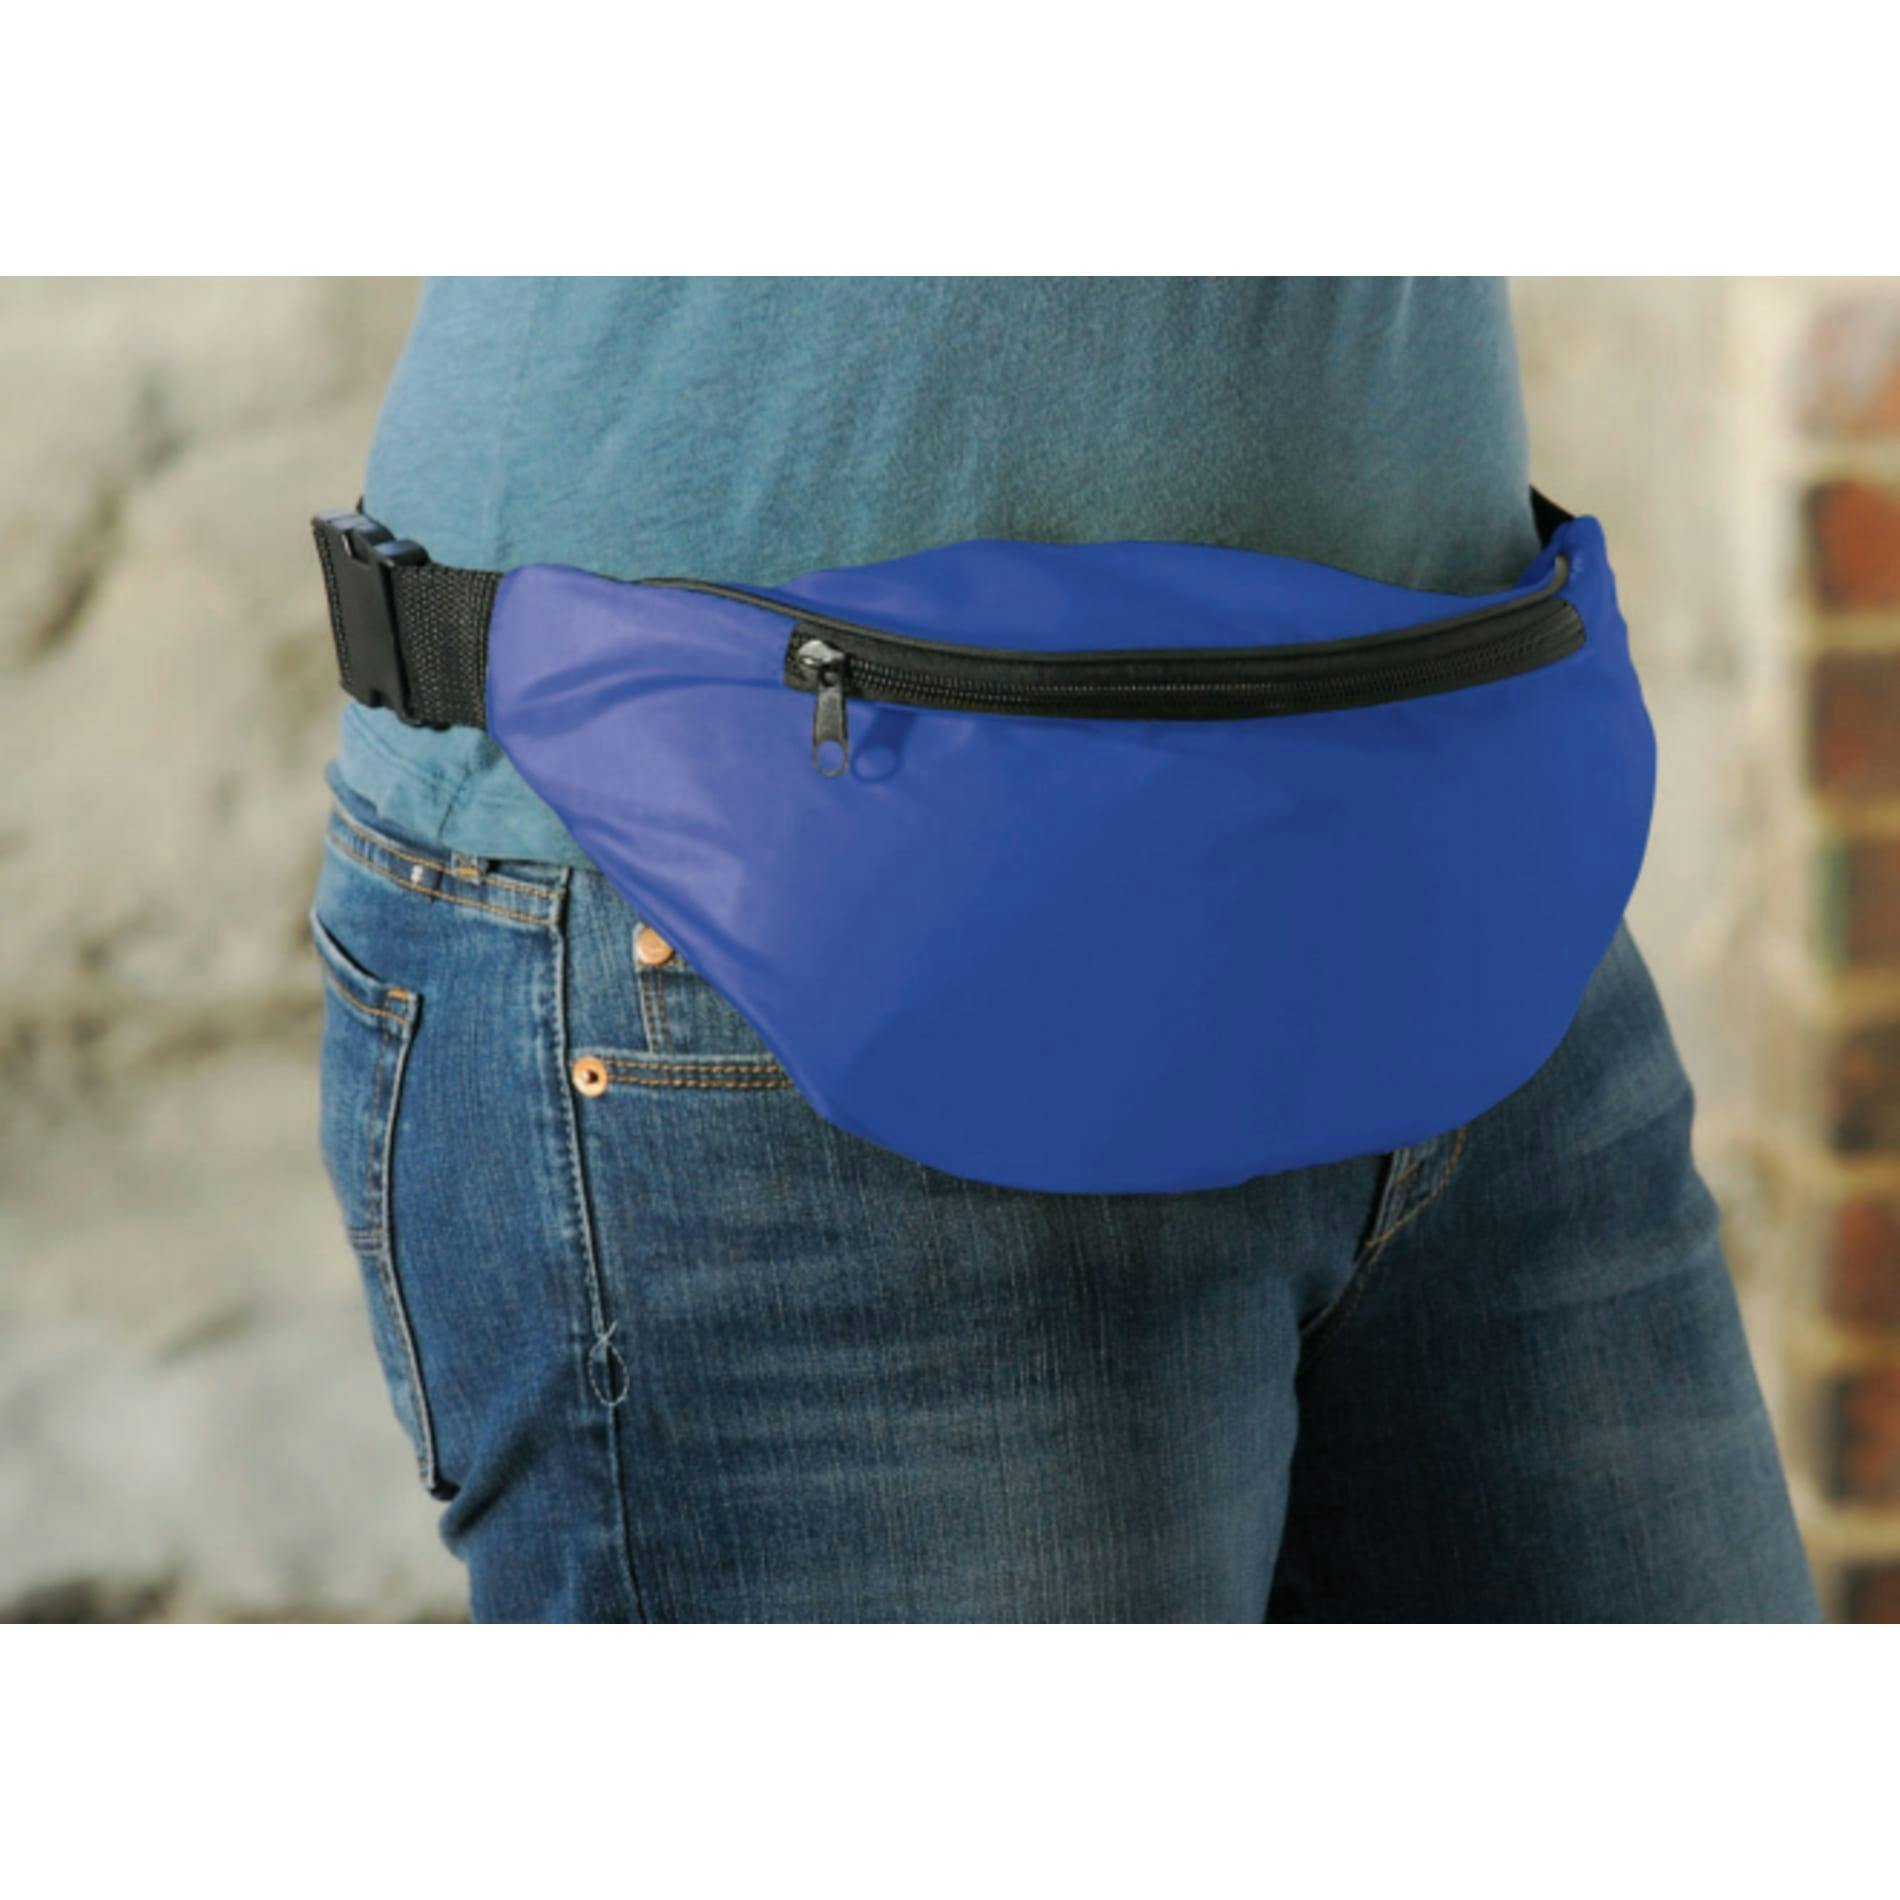 Hipster Budget Fanny Pack - additional Image 2